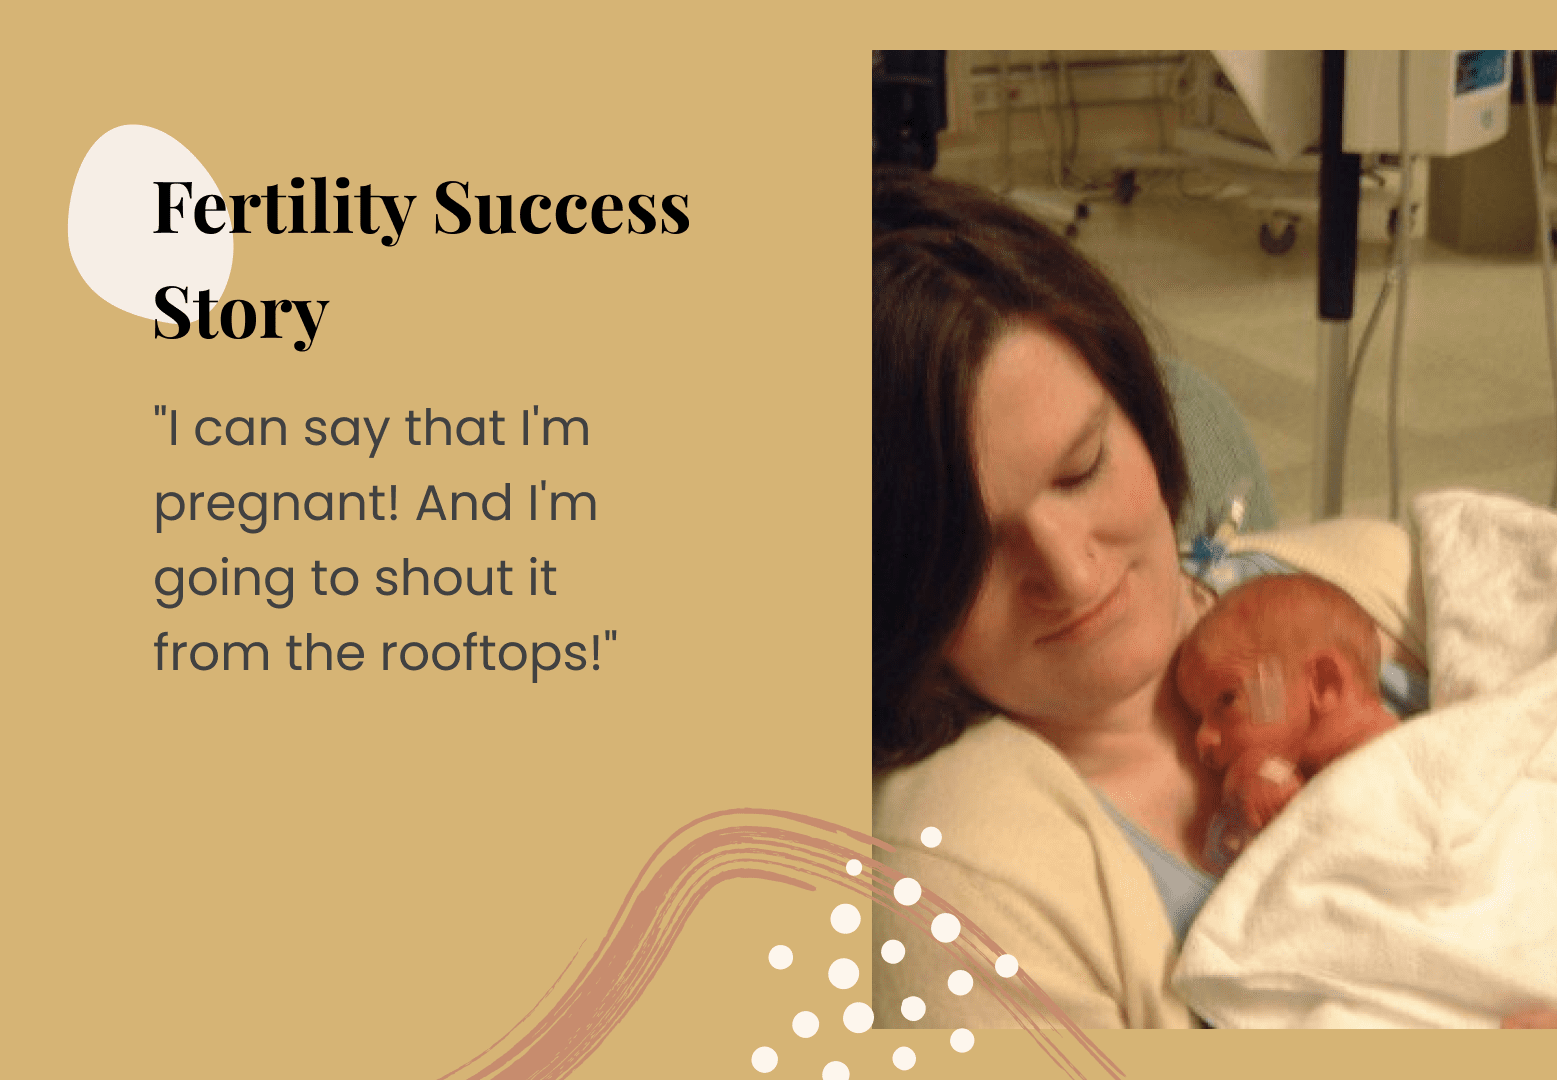 Fertility Success Story: "I can say that I'm pregnant! And I'm going to shout it from the rooftops!"